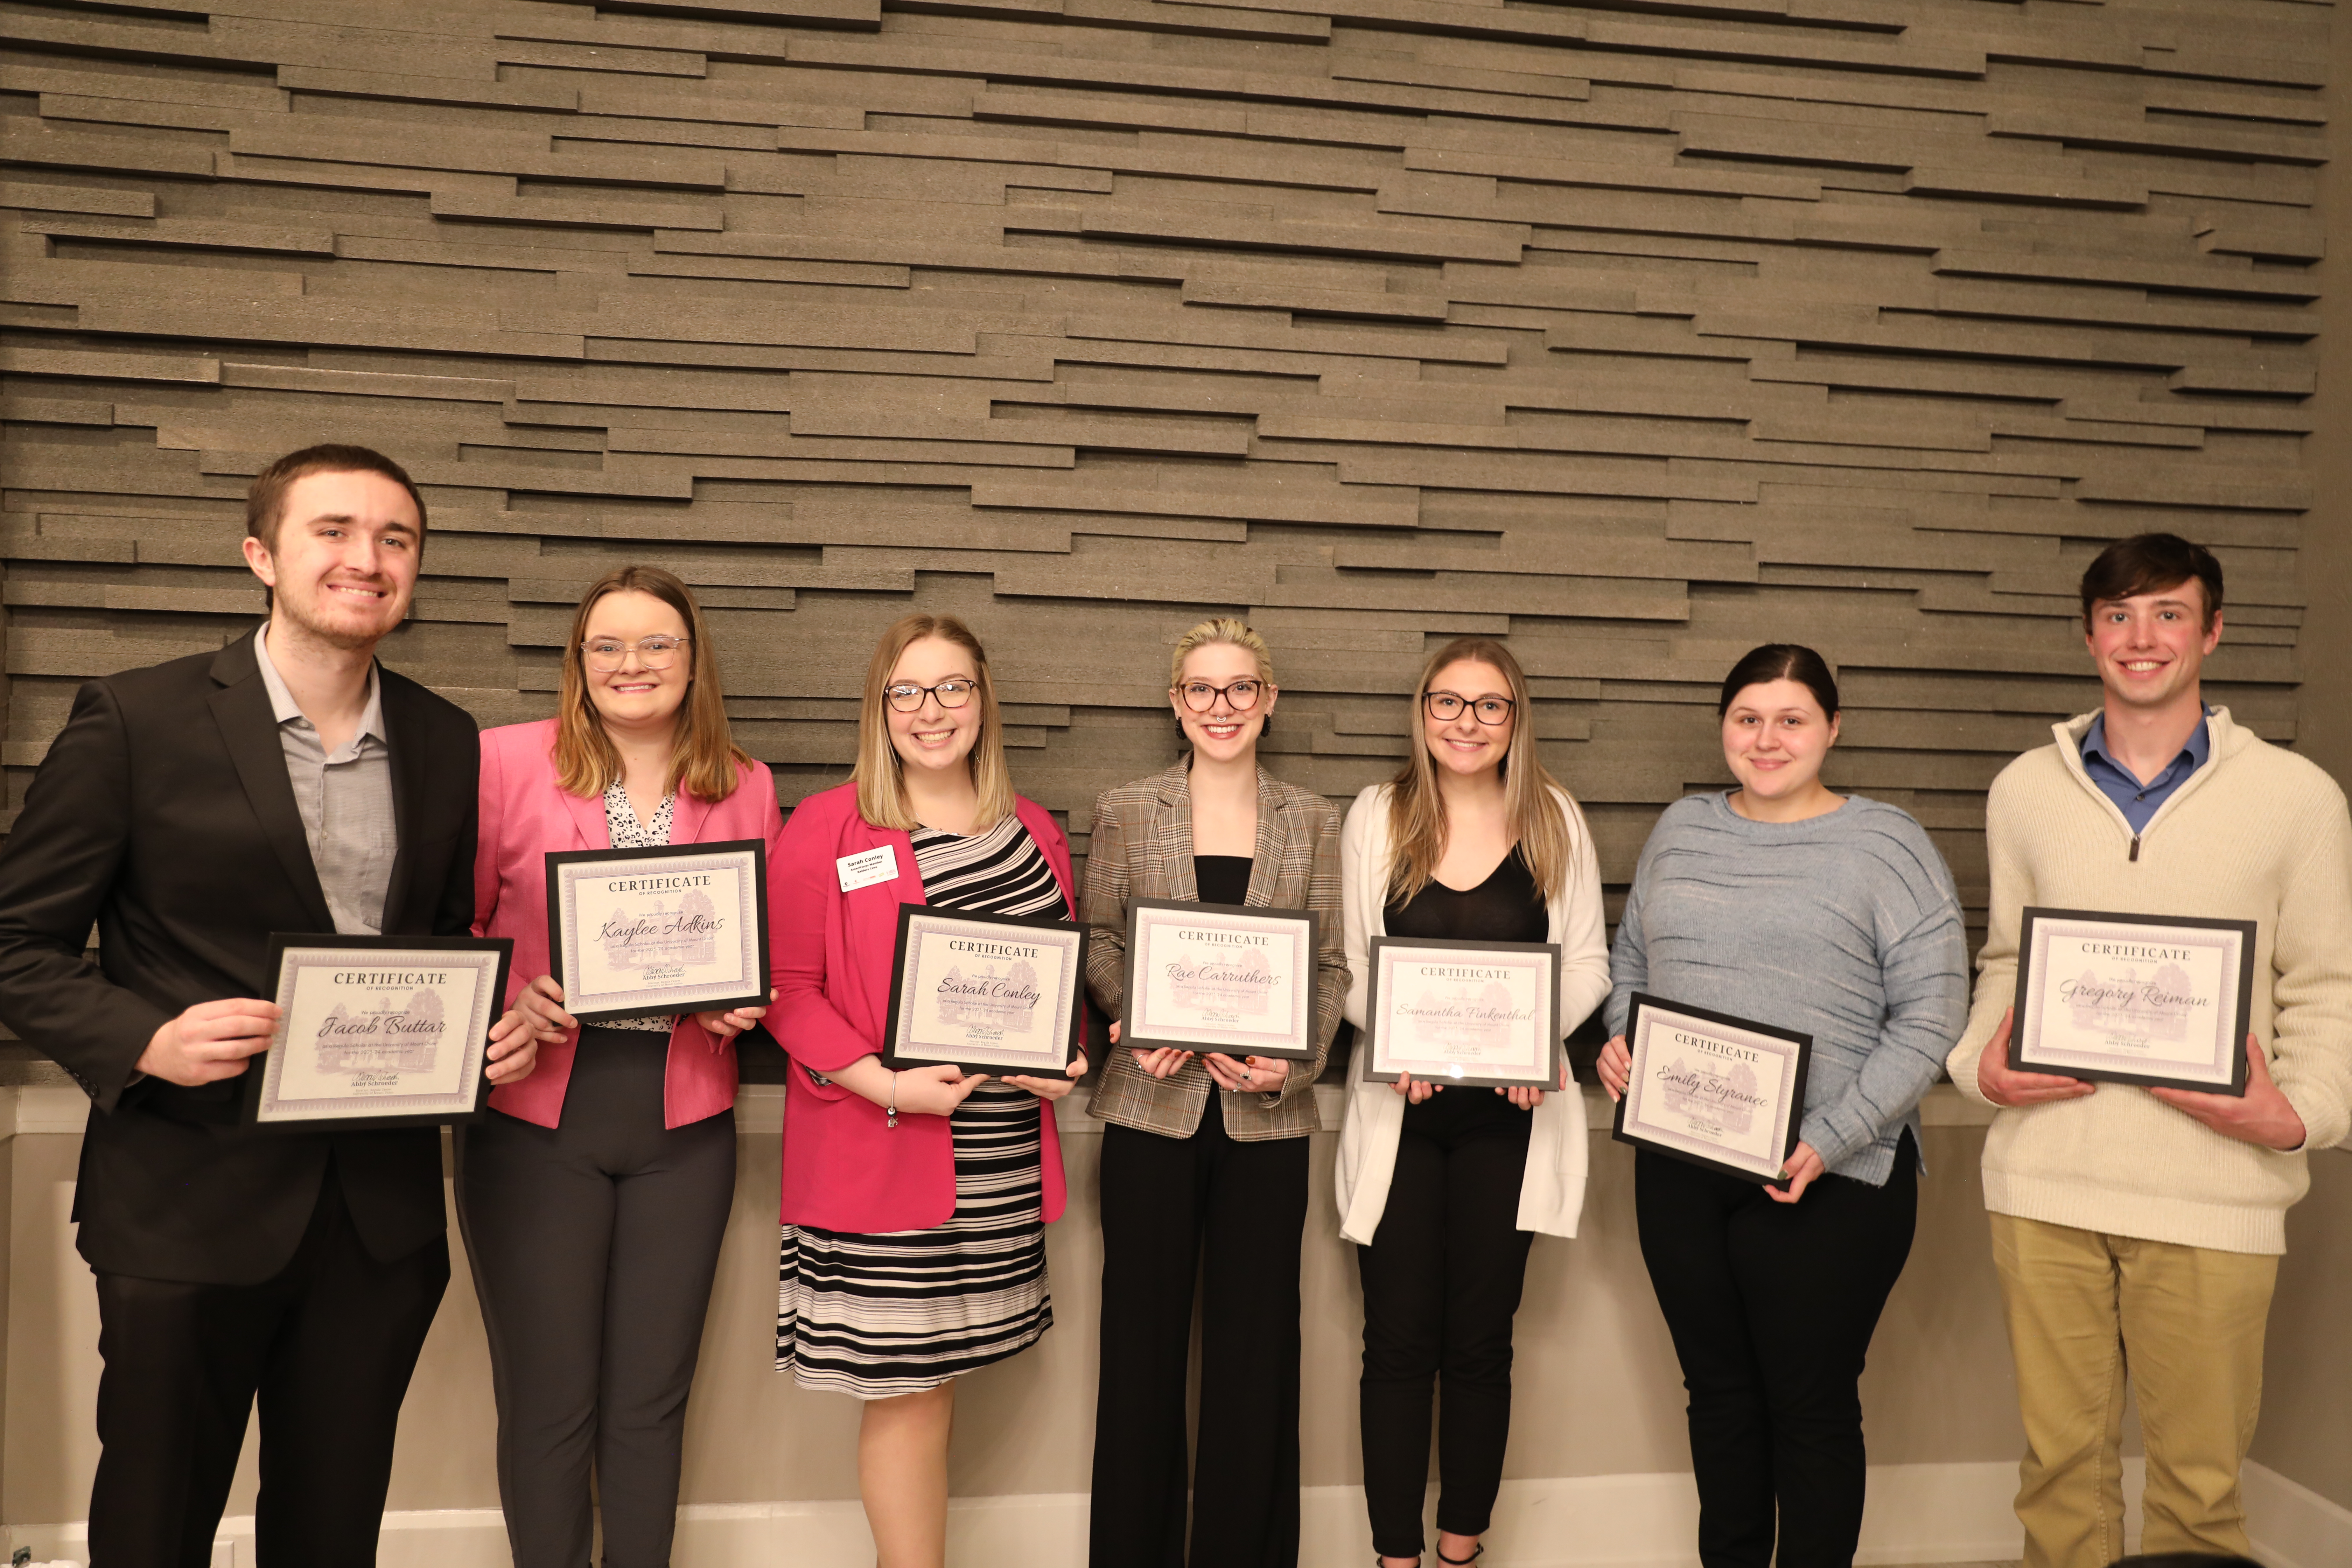 Seven students stand holding Regula Scholar certificates bearing their names while smiling in business casual attire